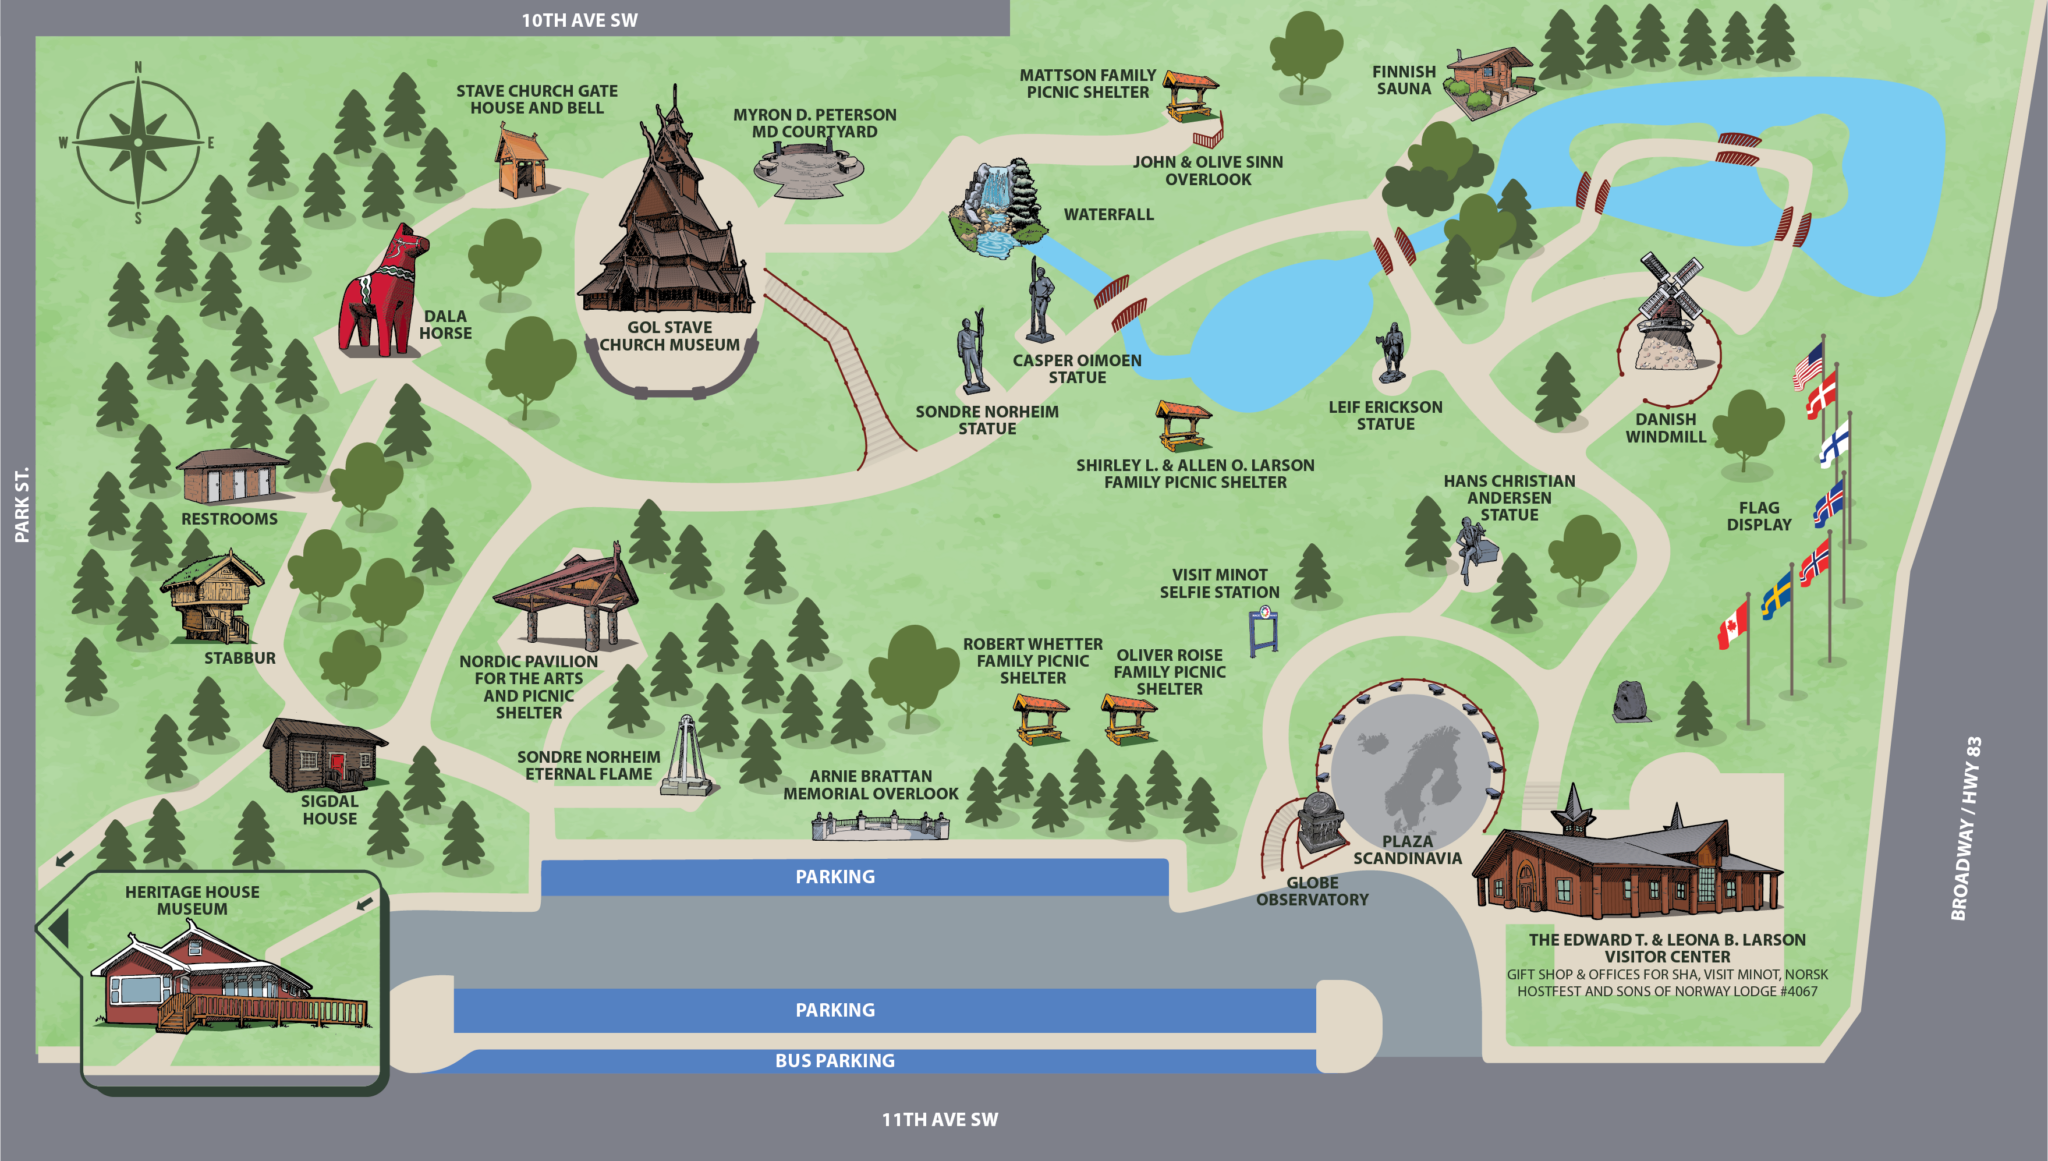 Map of the Scandinavian Heritage Park showing the parks attractions in photo realistic form with park path and parking areas shown.